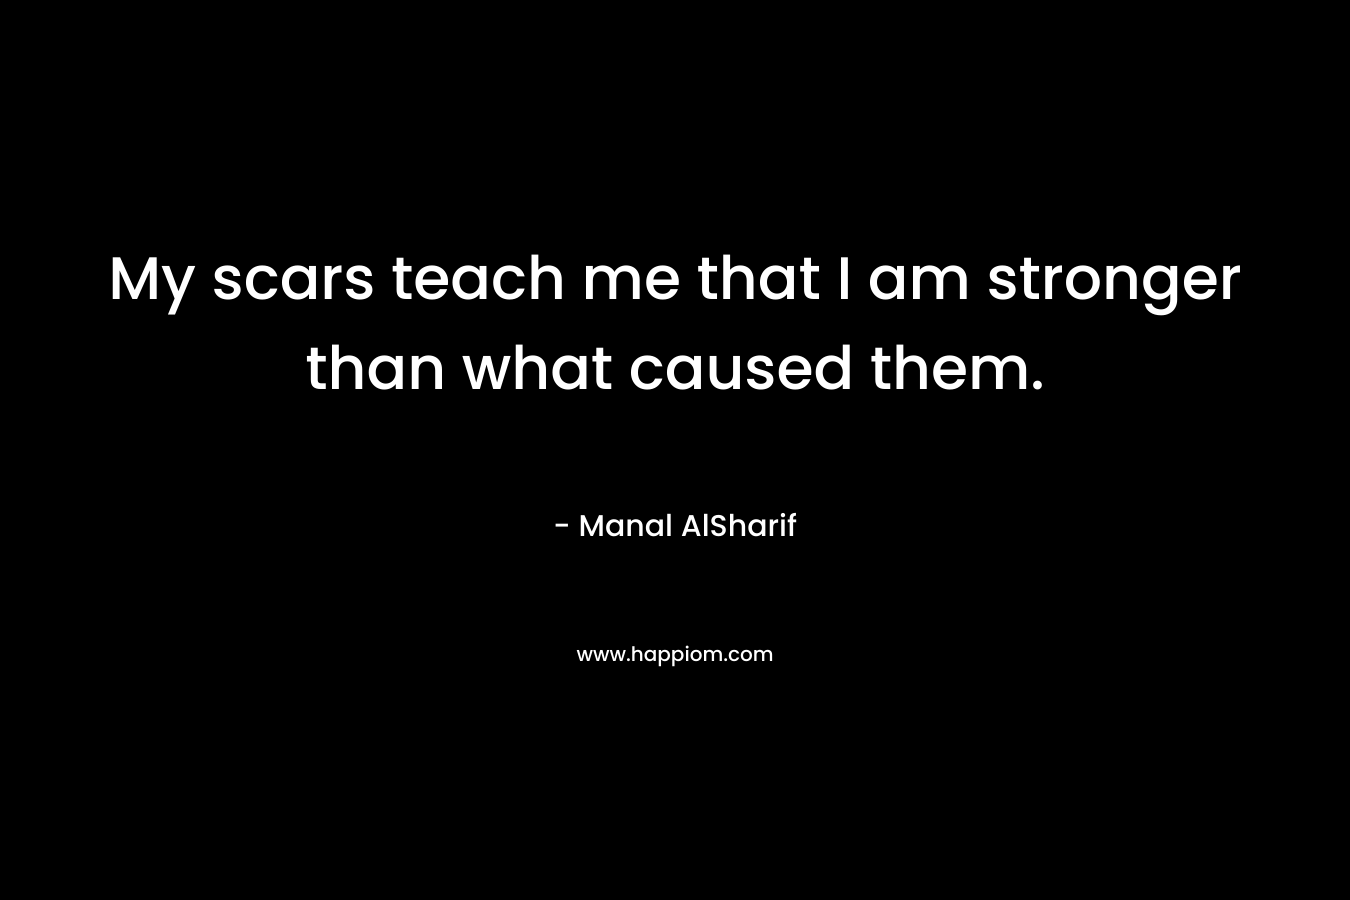 My scars teach me that I am stronger than what caused them.